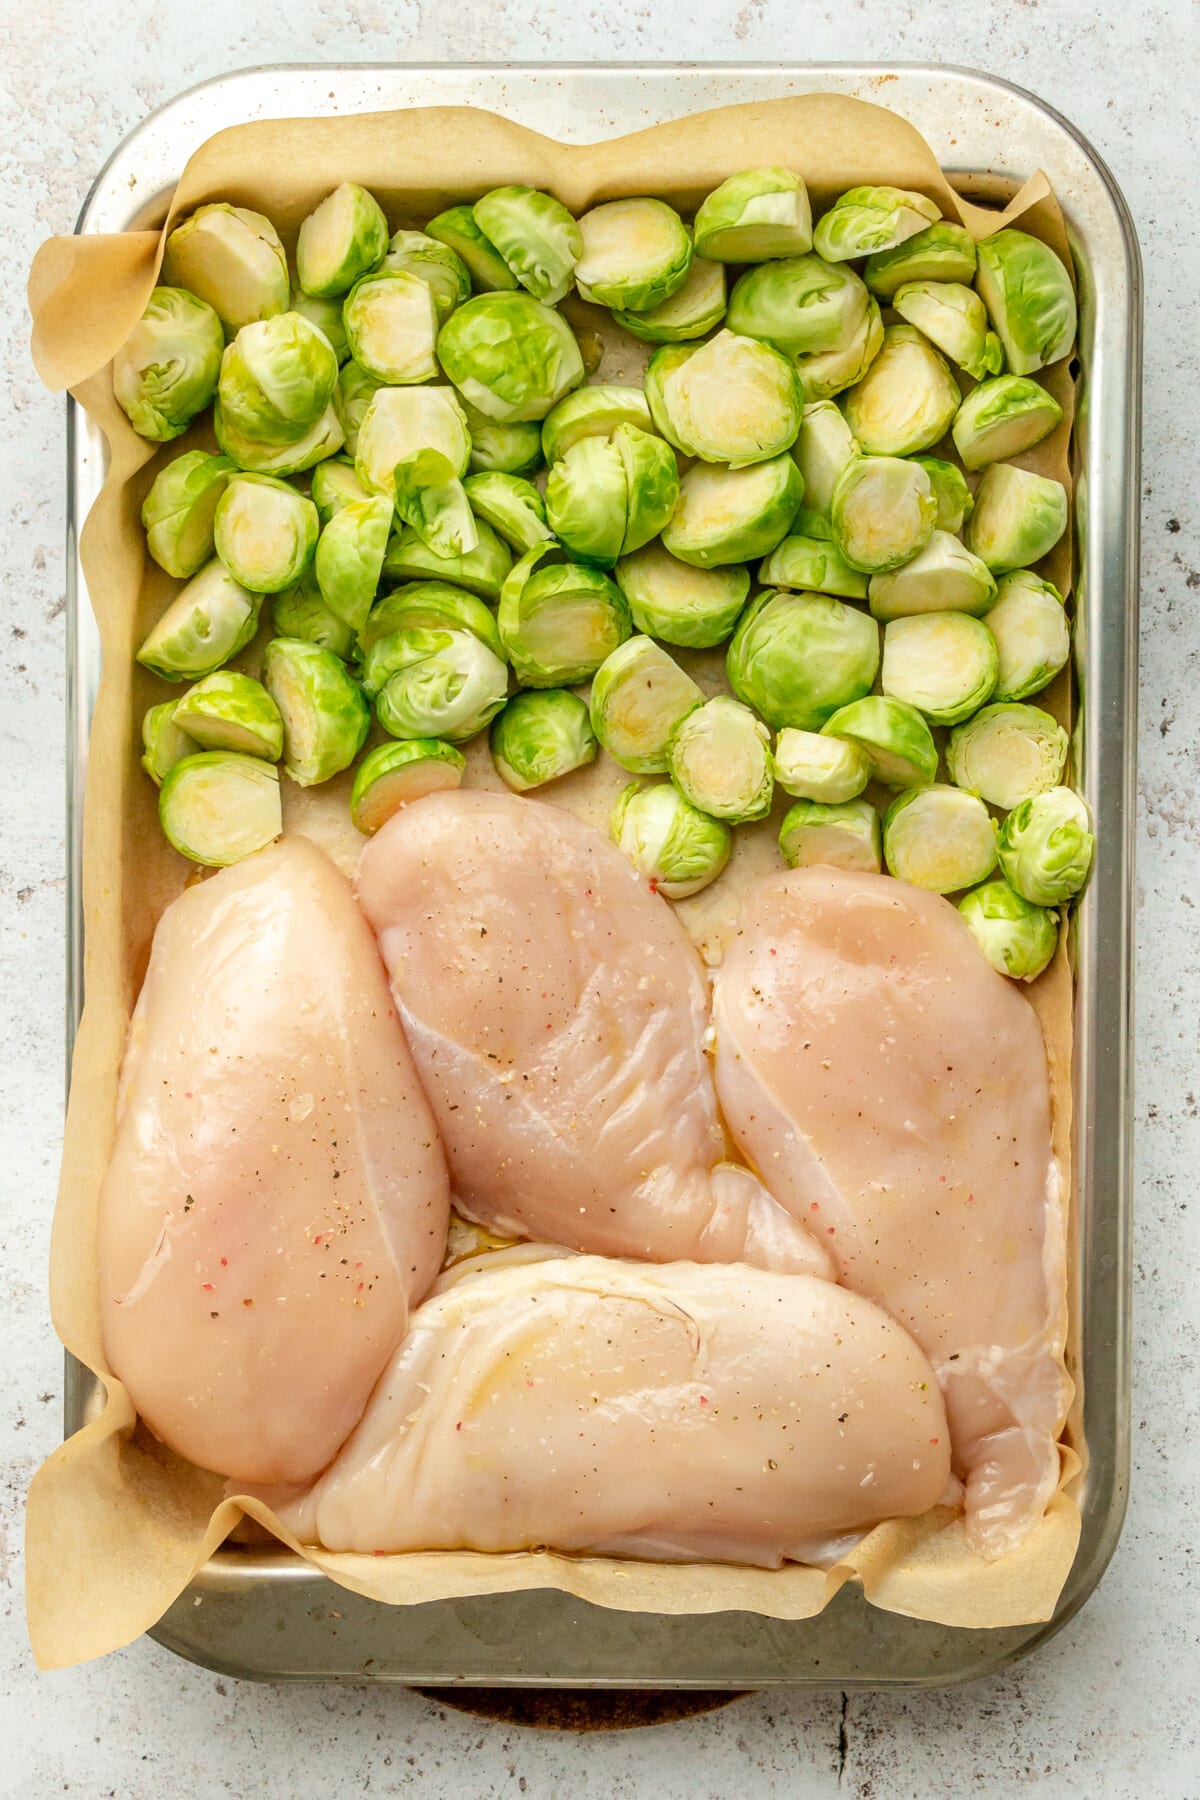 Chicken breastes and halved brussel sprouts sit on a rimmed lined baking sheet on a light grey surface.